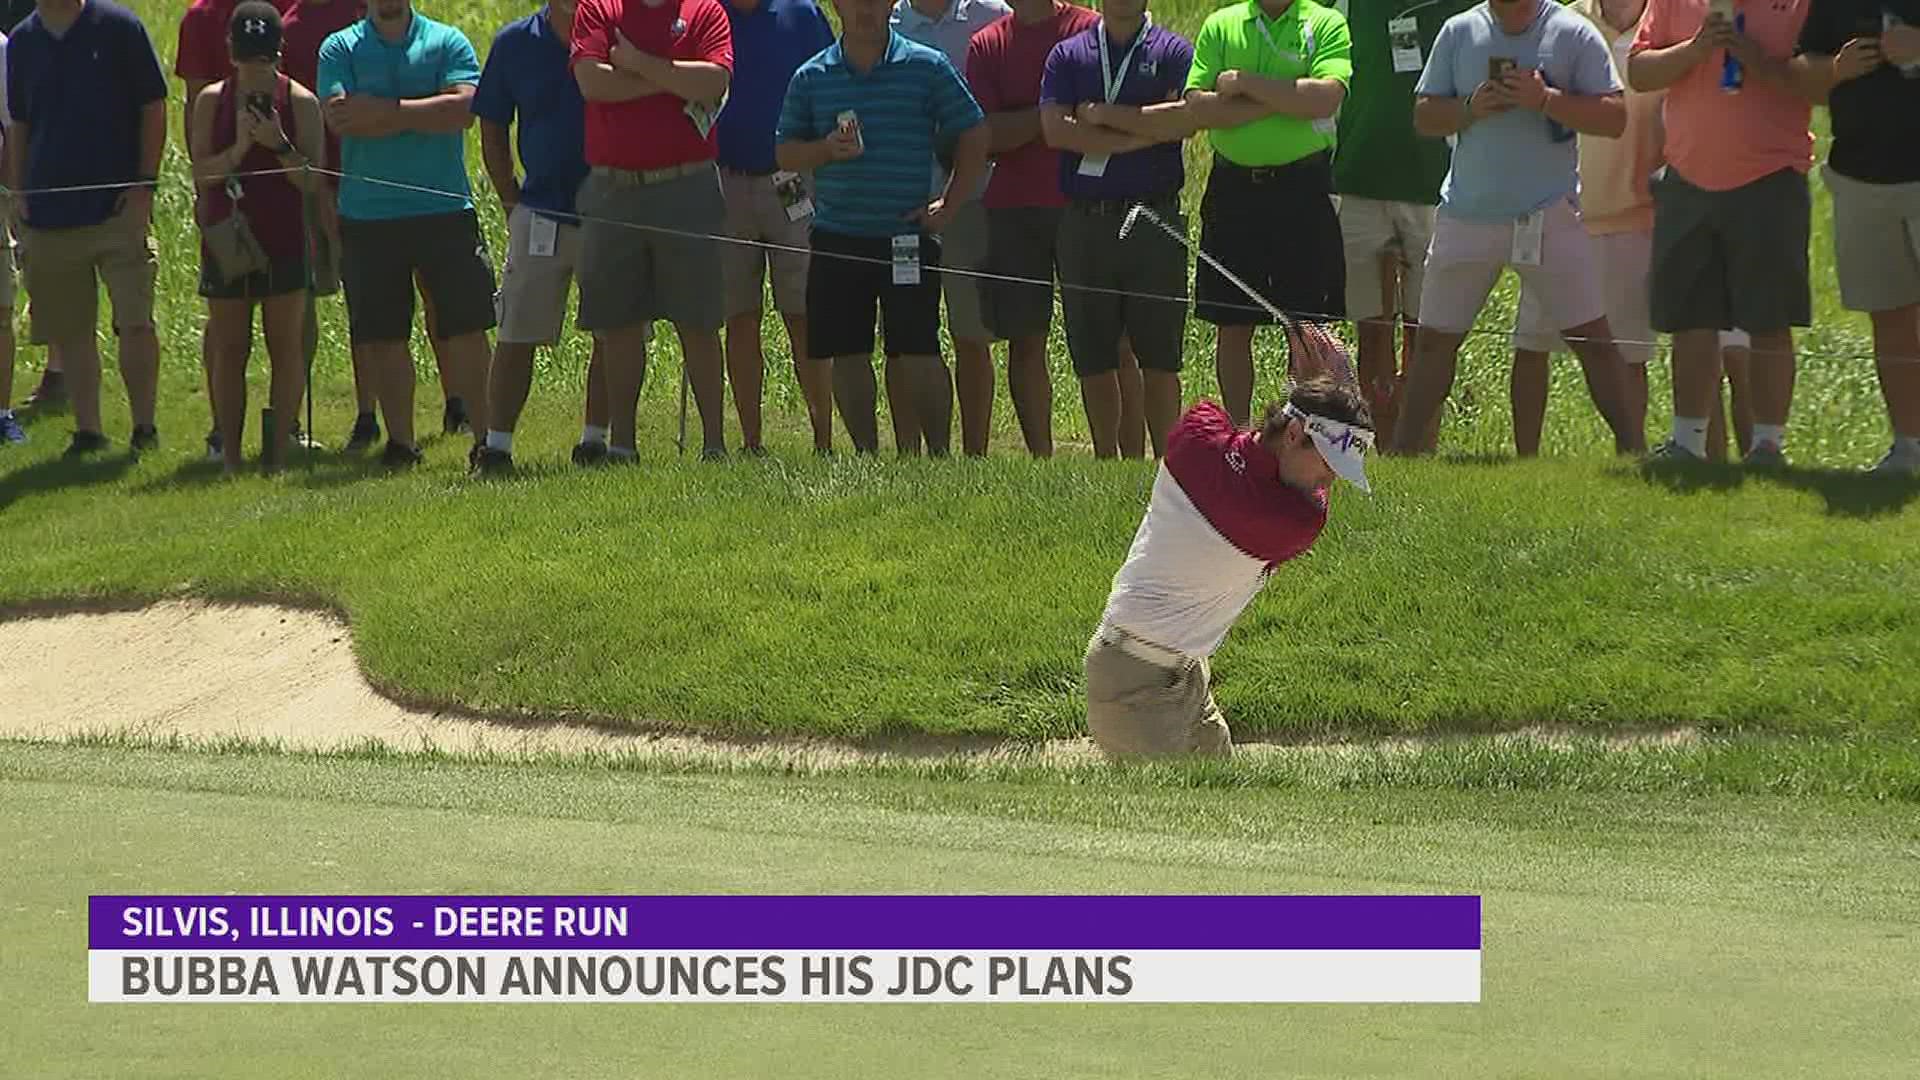 The two-time Masters champion announced his 2022 summer schedule with JDC making the list.